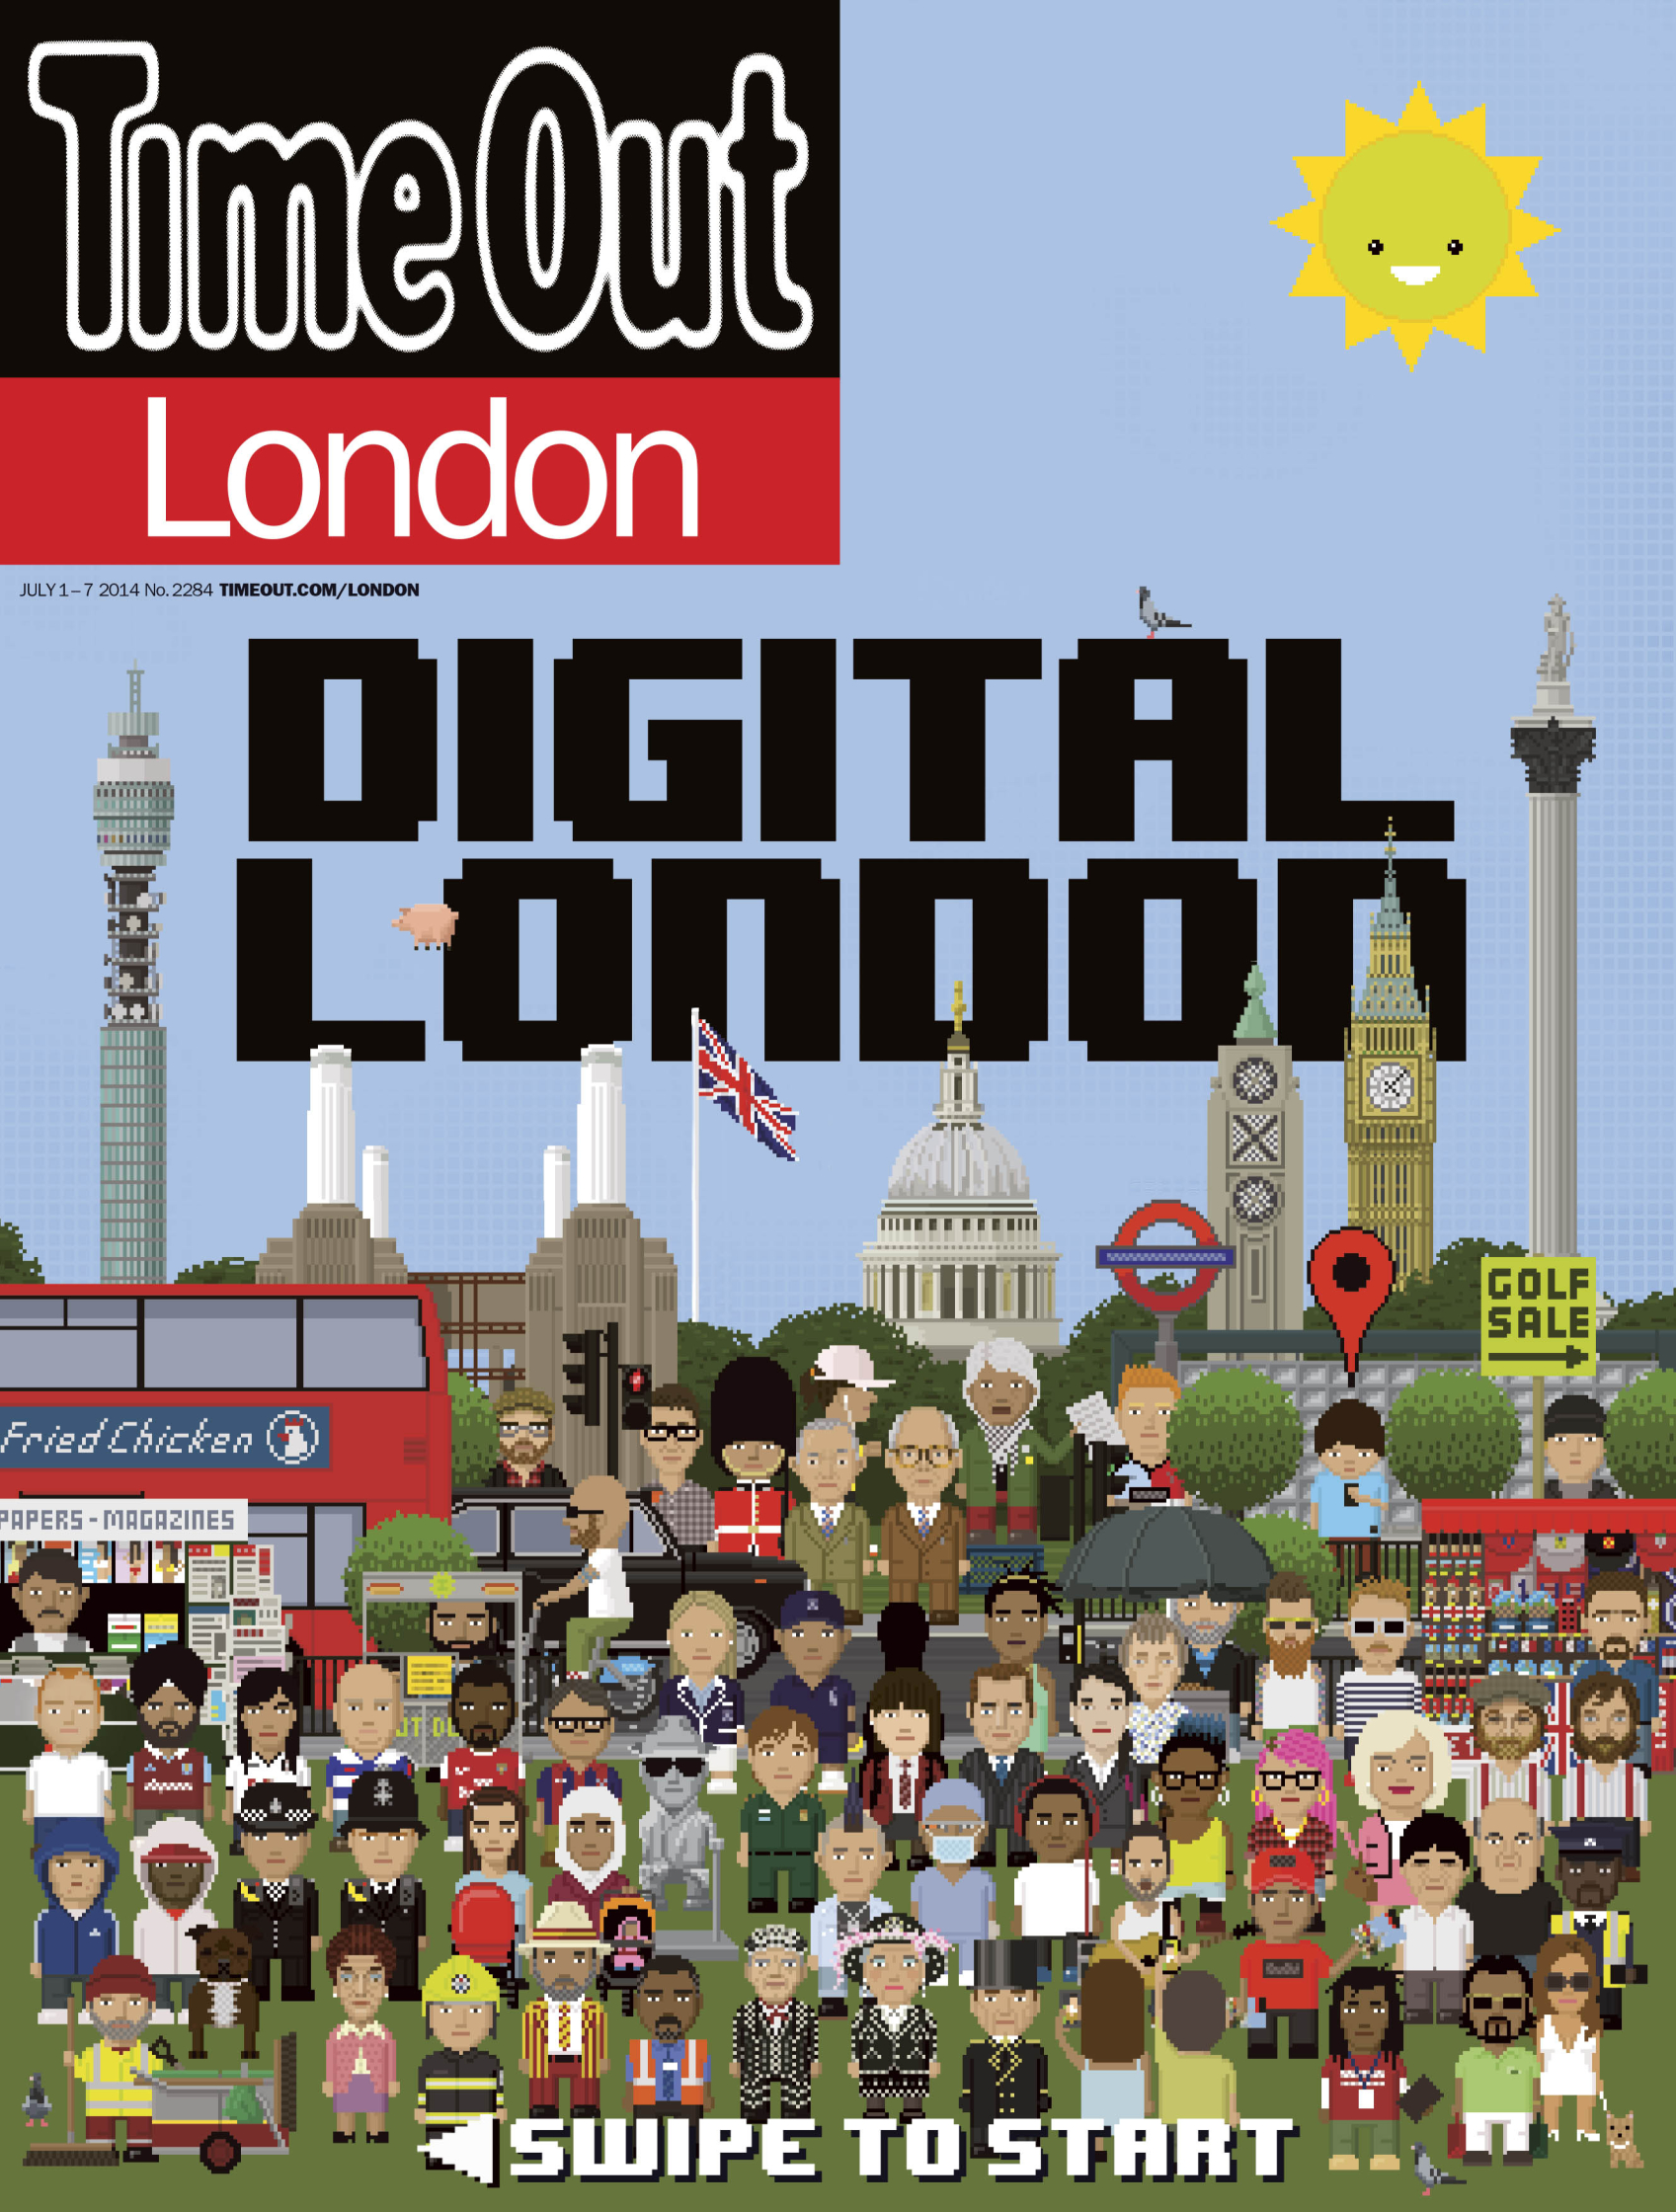 Digital London / Time Out